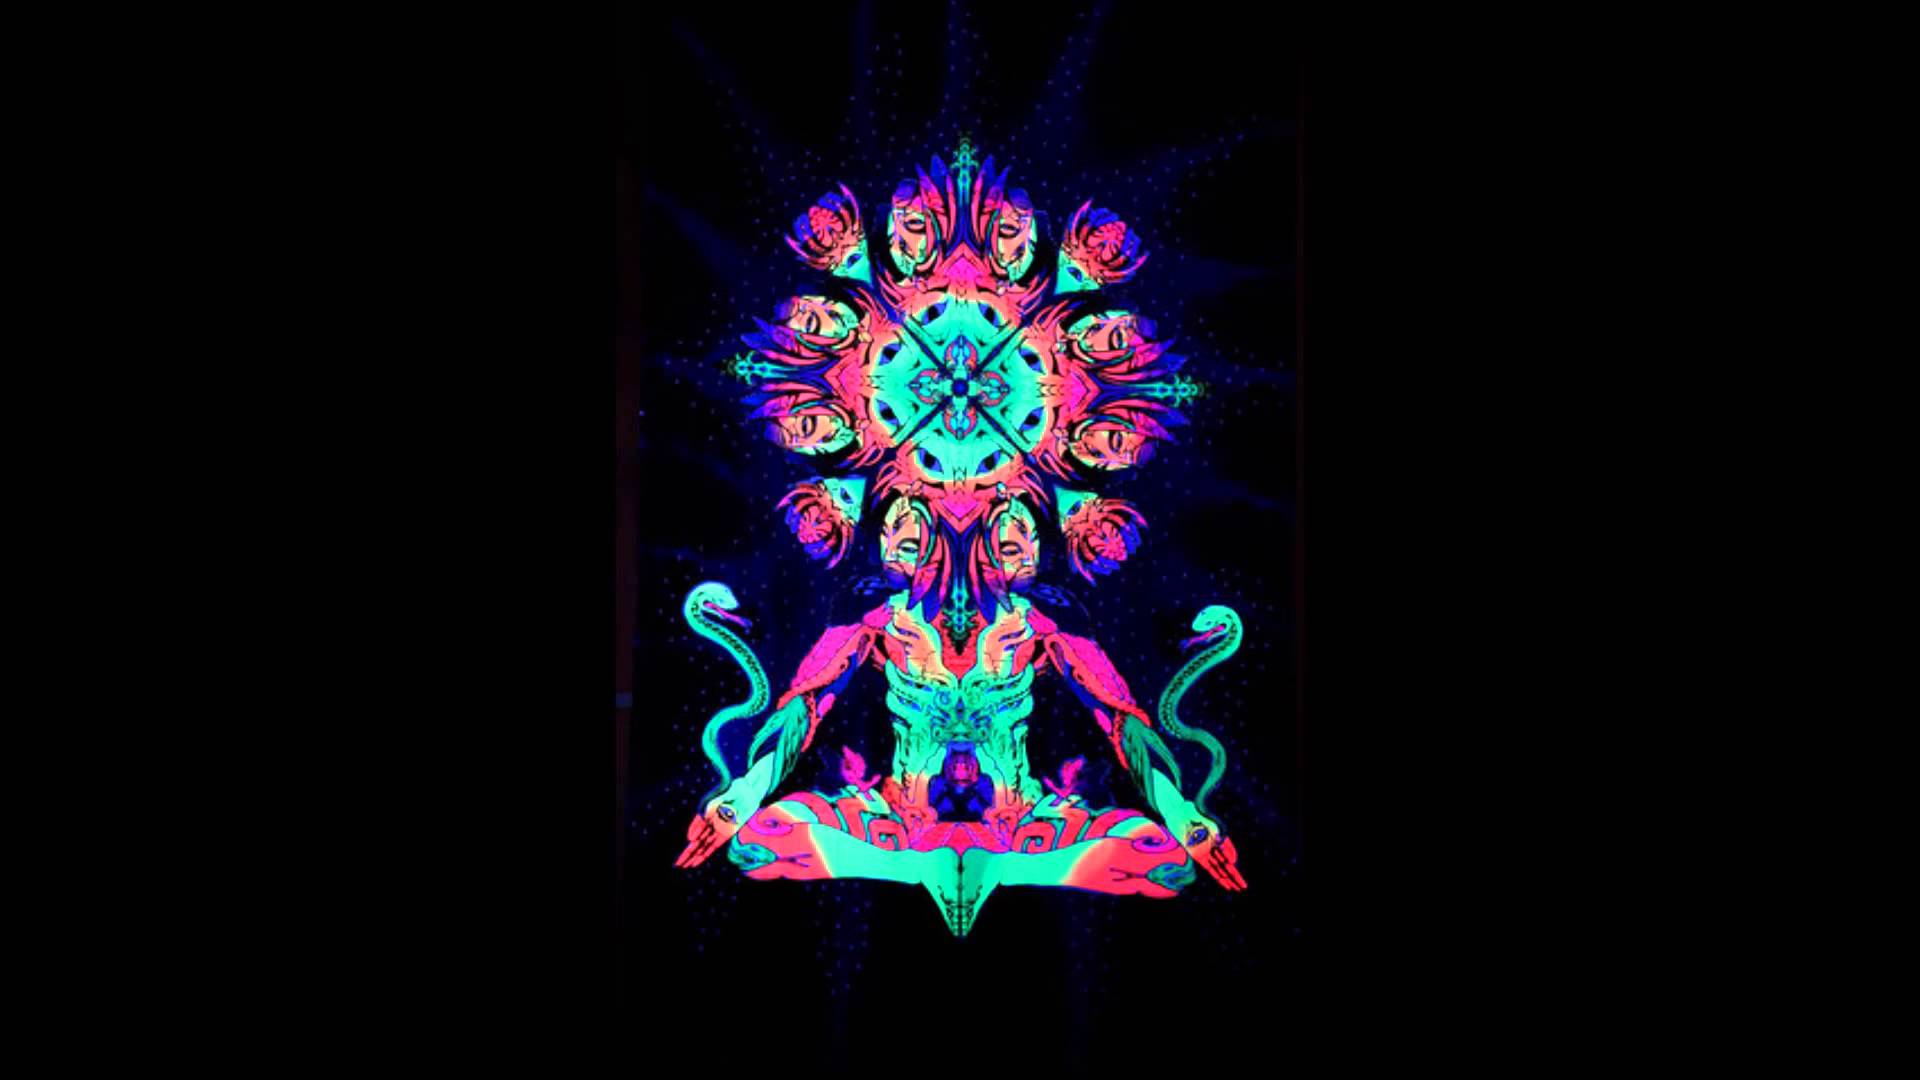 Share more than 66 dark psychedelic wallpaper iphone super hot   incdgdbentre